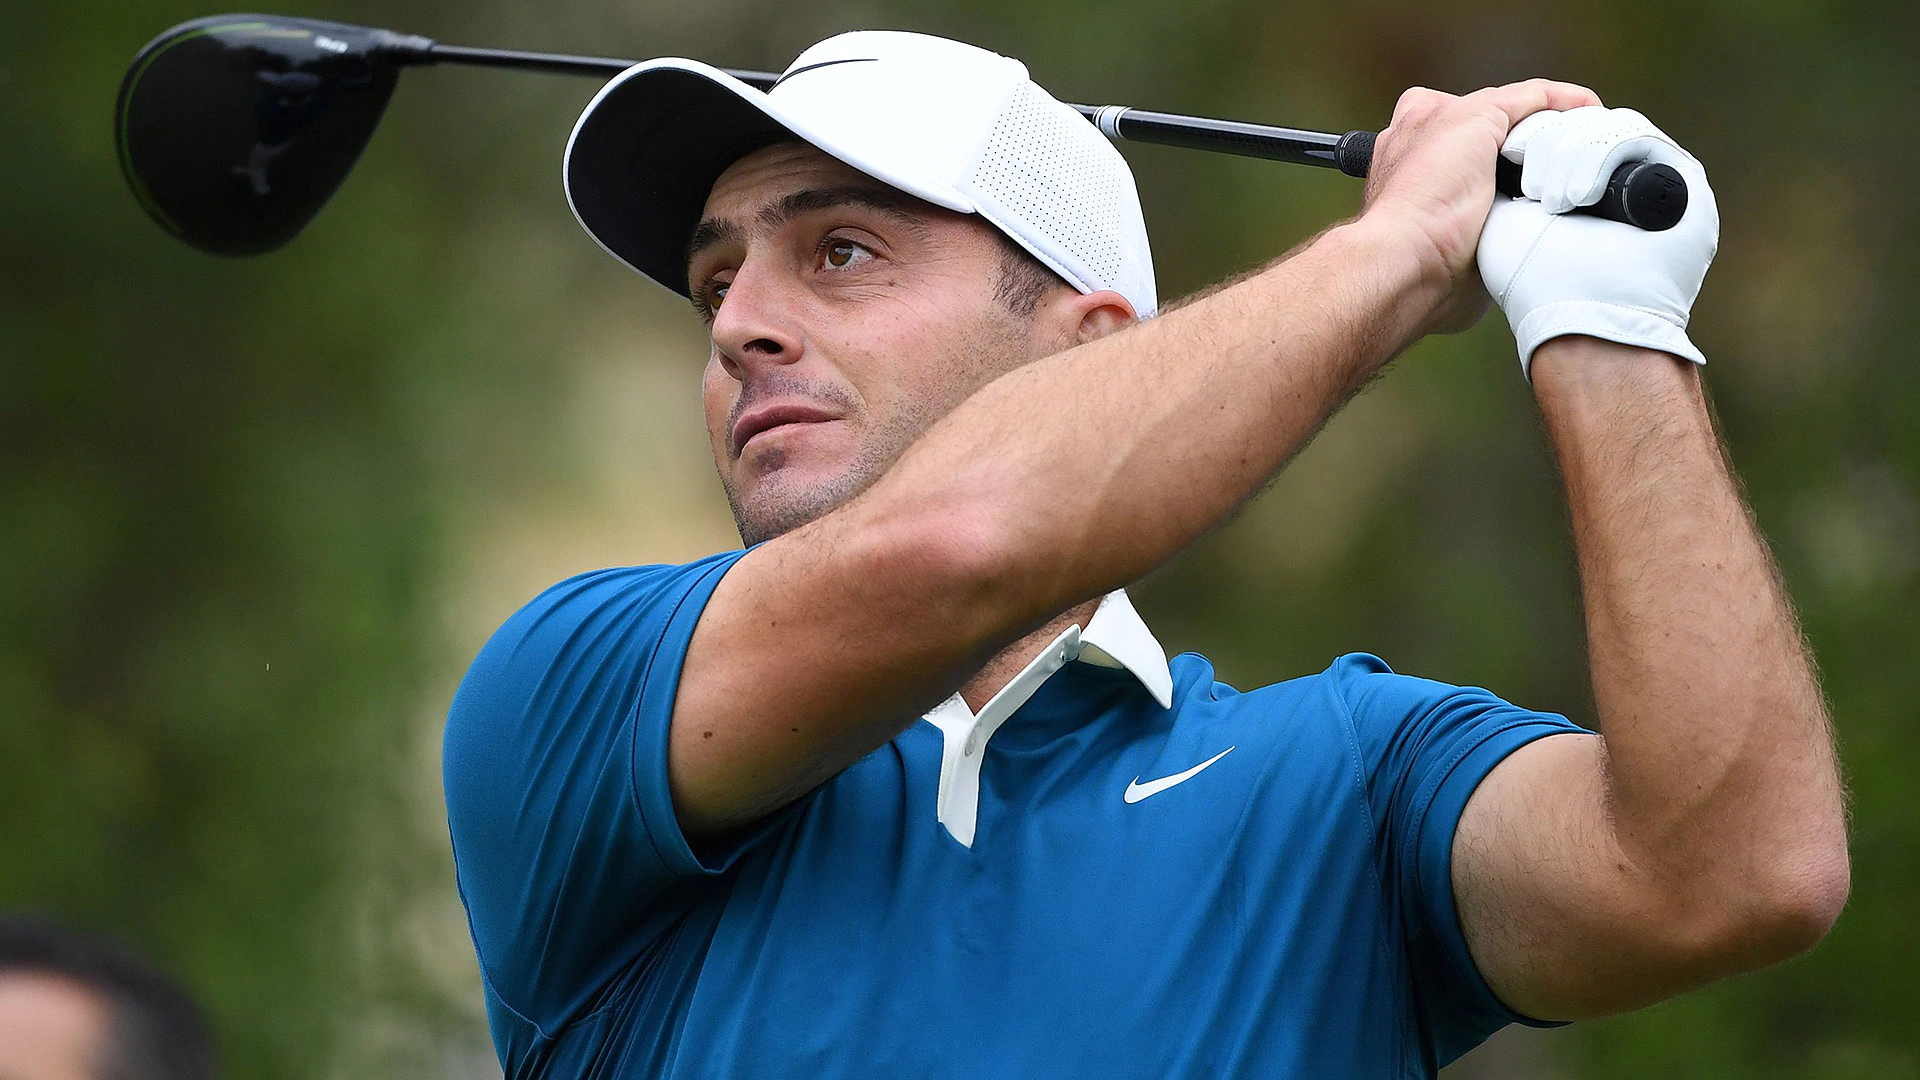 Francesco Molinari withdraws from U.S. Open, remains uncertain about return